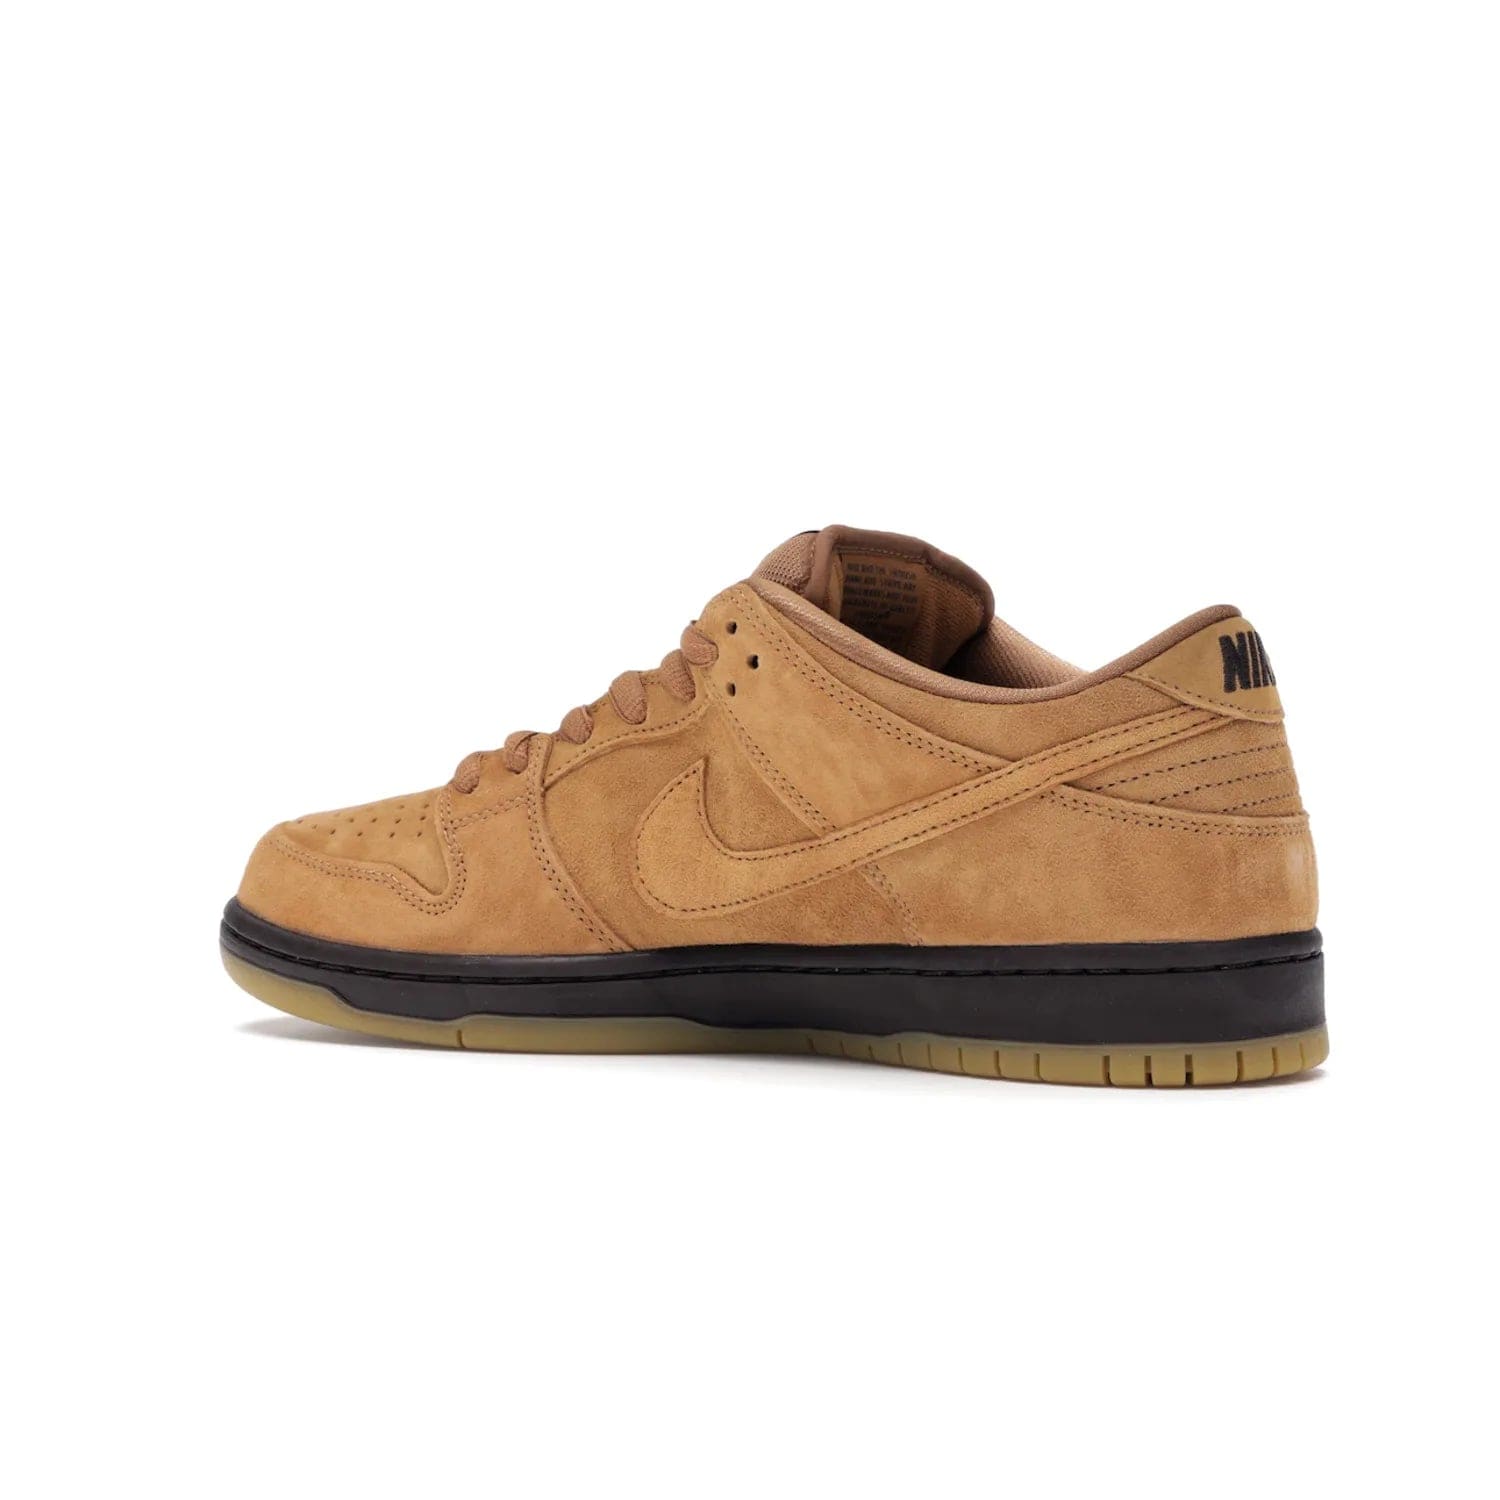 Nike SB Dunk Low Wheat (2021/2023) - Image 22 - Only at www.BallersClubKickz.com - The Nike SB Dunk Low Wheat (2021/2023)has a sleek silhouette and wheat suede upper. Tan tones for lining, mesh tongues, and laces. Iconic color palette midsole, perforated boxing toe. Brown branding on tongue and heel. Gum rubber outsole with partitioned pattern for traction. Eschewed in Feb 2021 for $110.